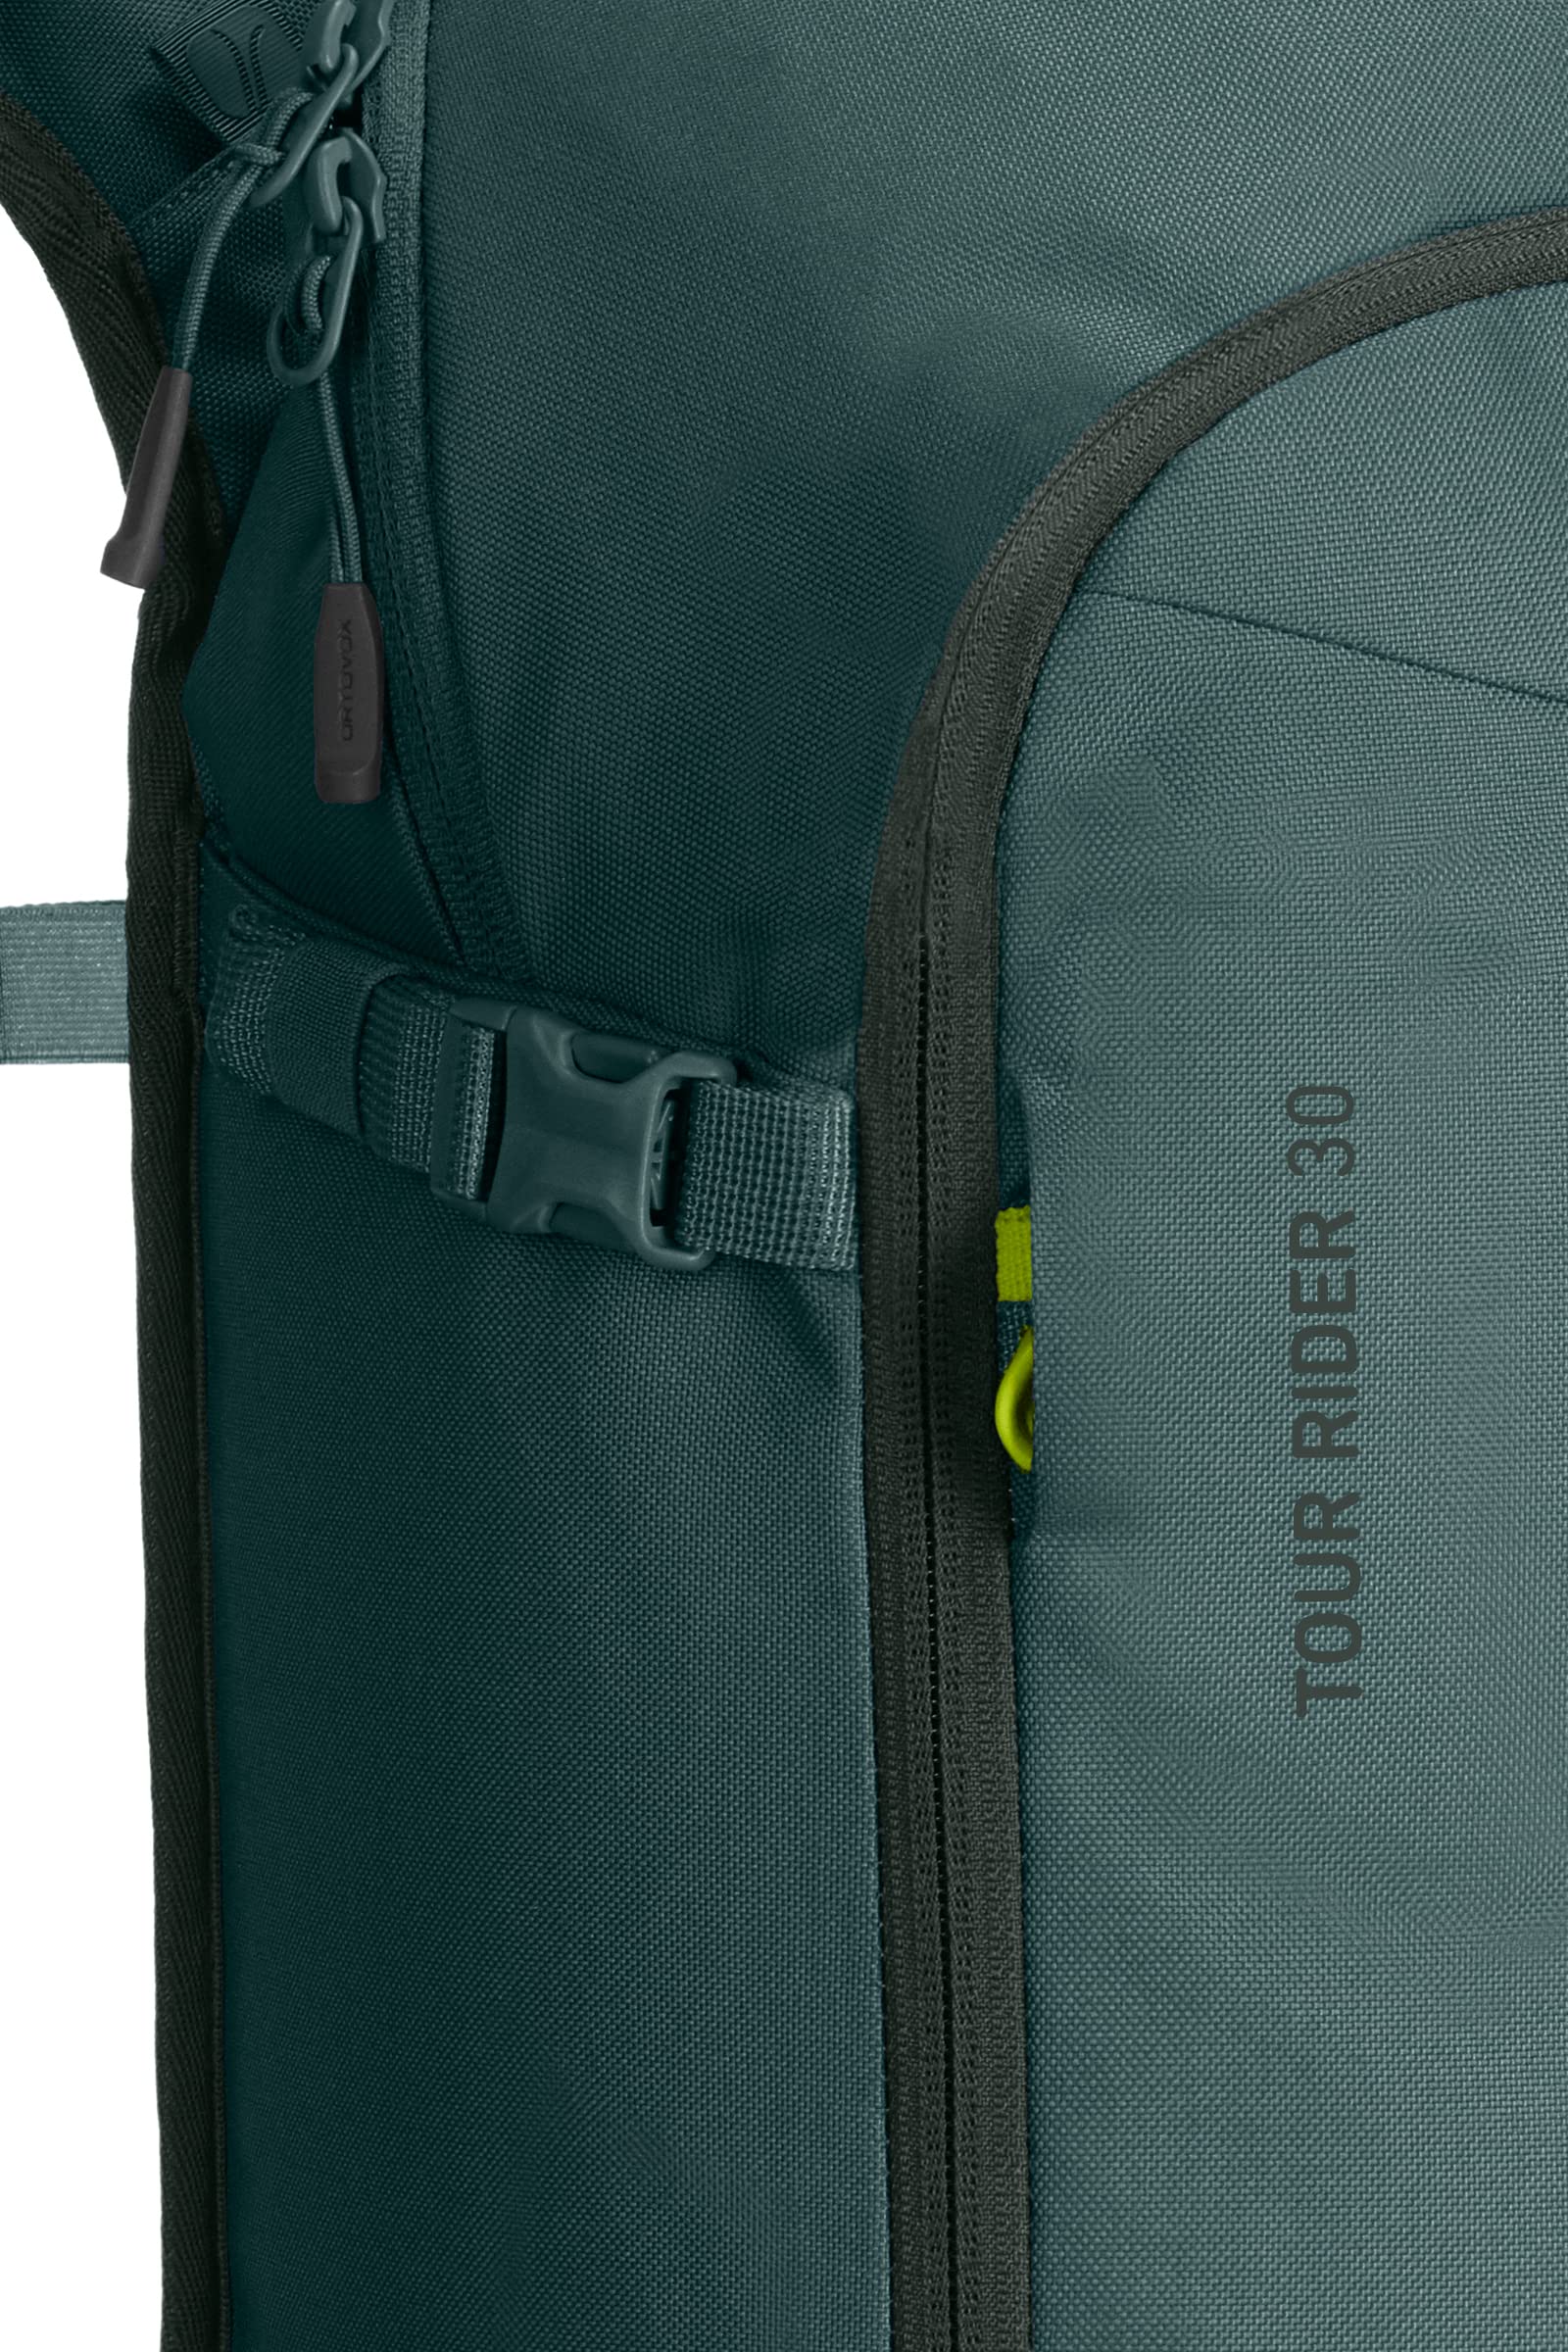 ORTOVOX Tour Rider 30 Backpack, Green dust